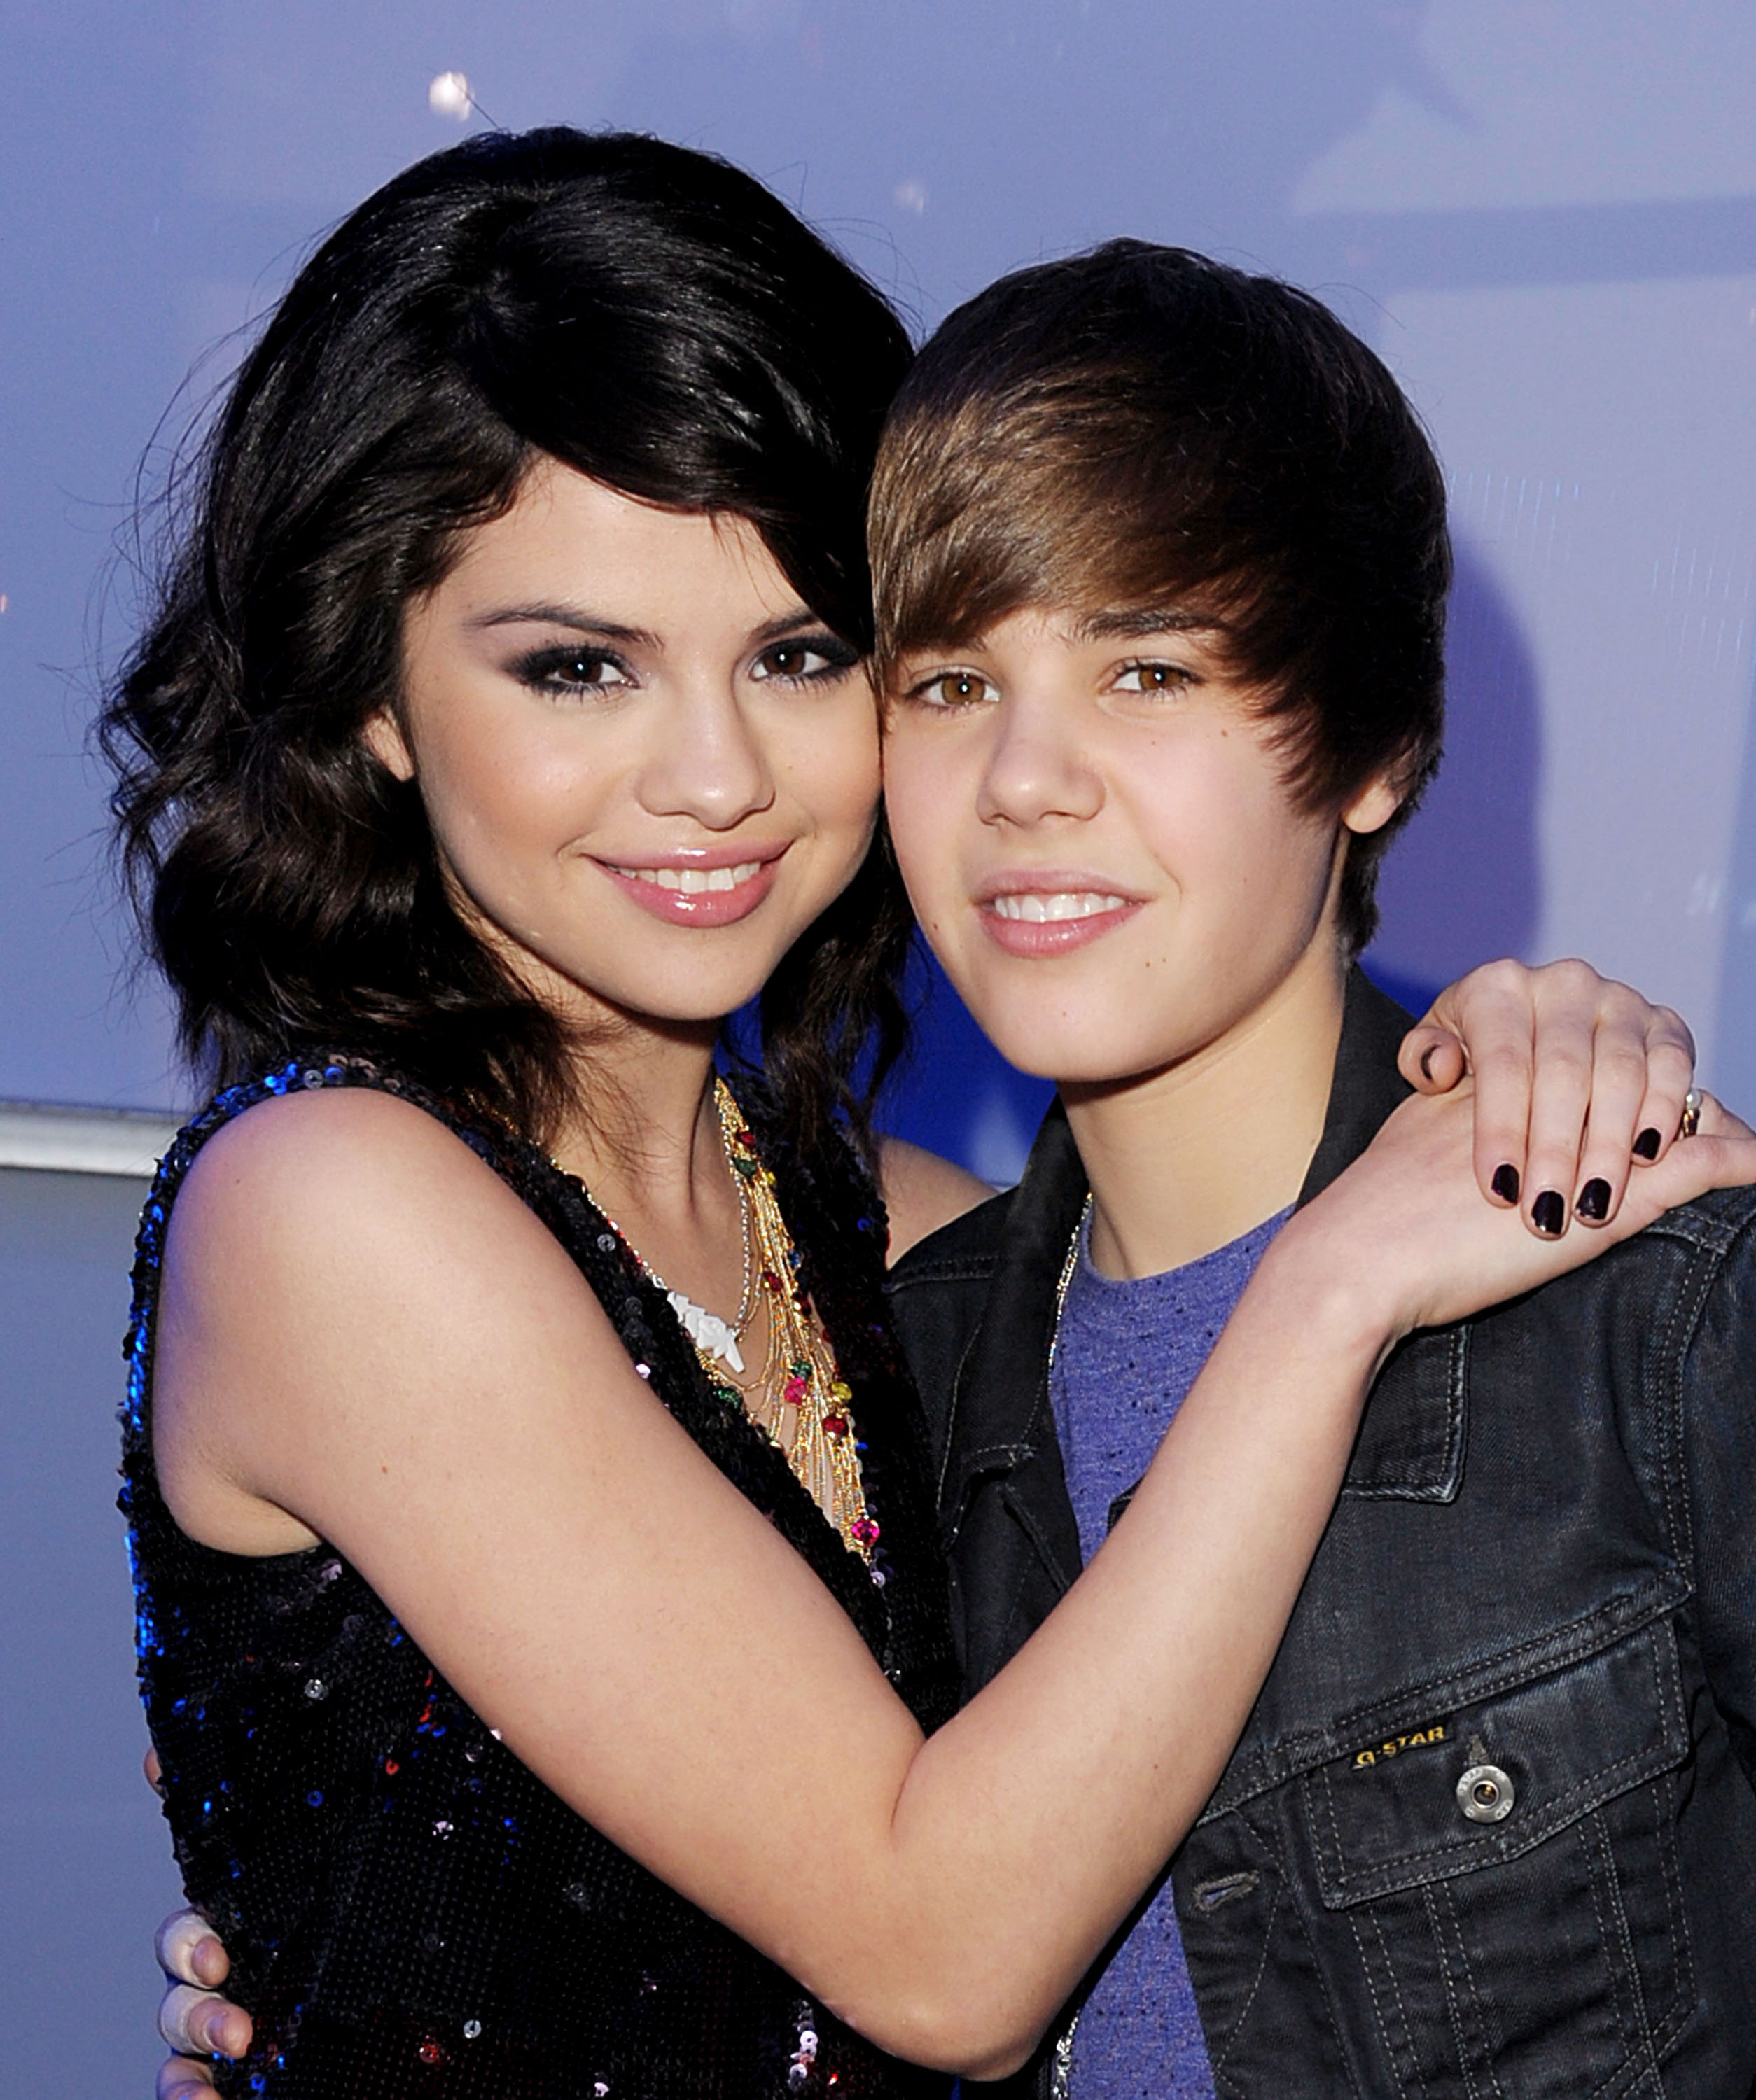 Some fans believe Selena, pictured in 2009, and Justin's new wife, Hailey, may currently be feuding with subliminal posts on social media